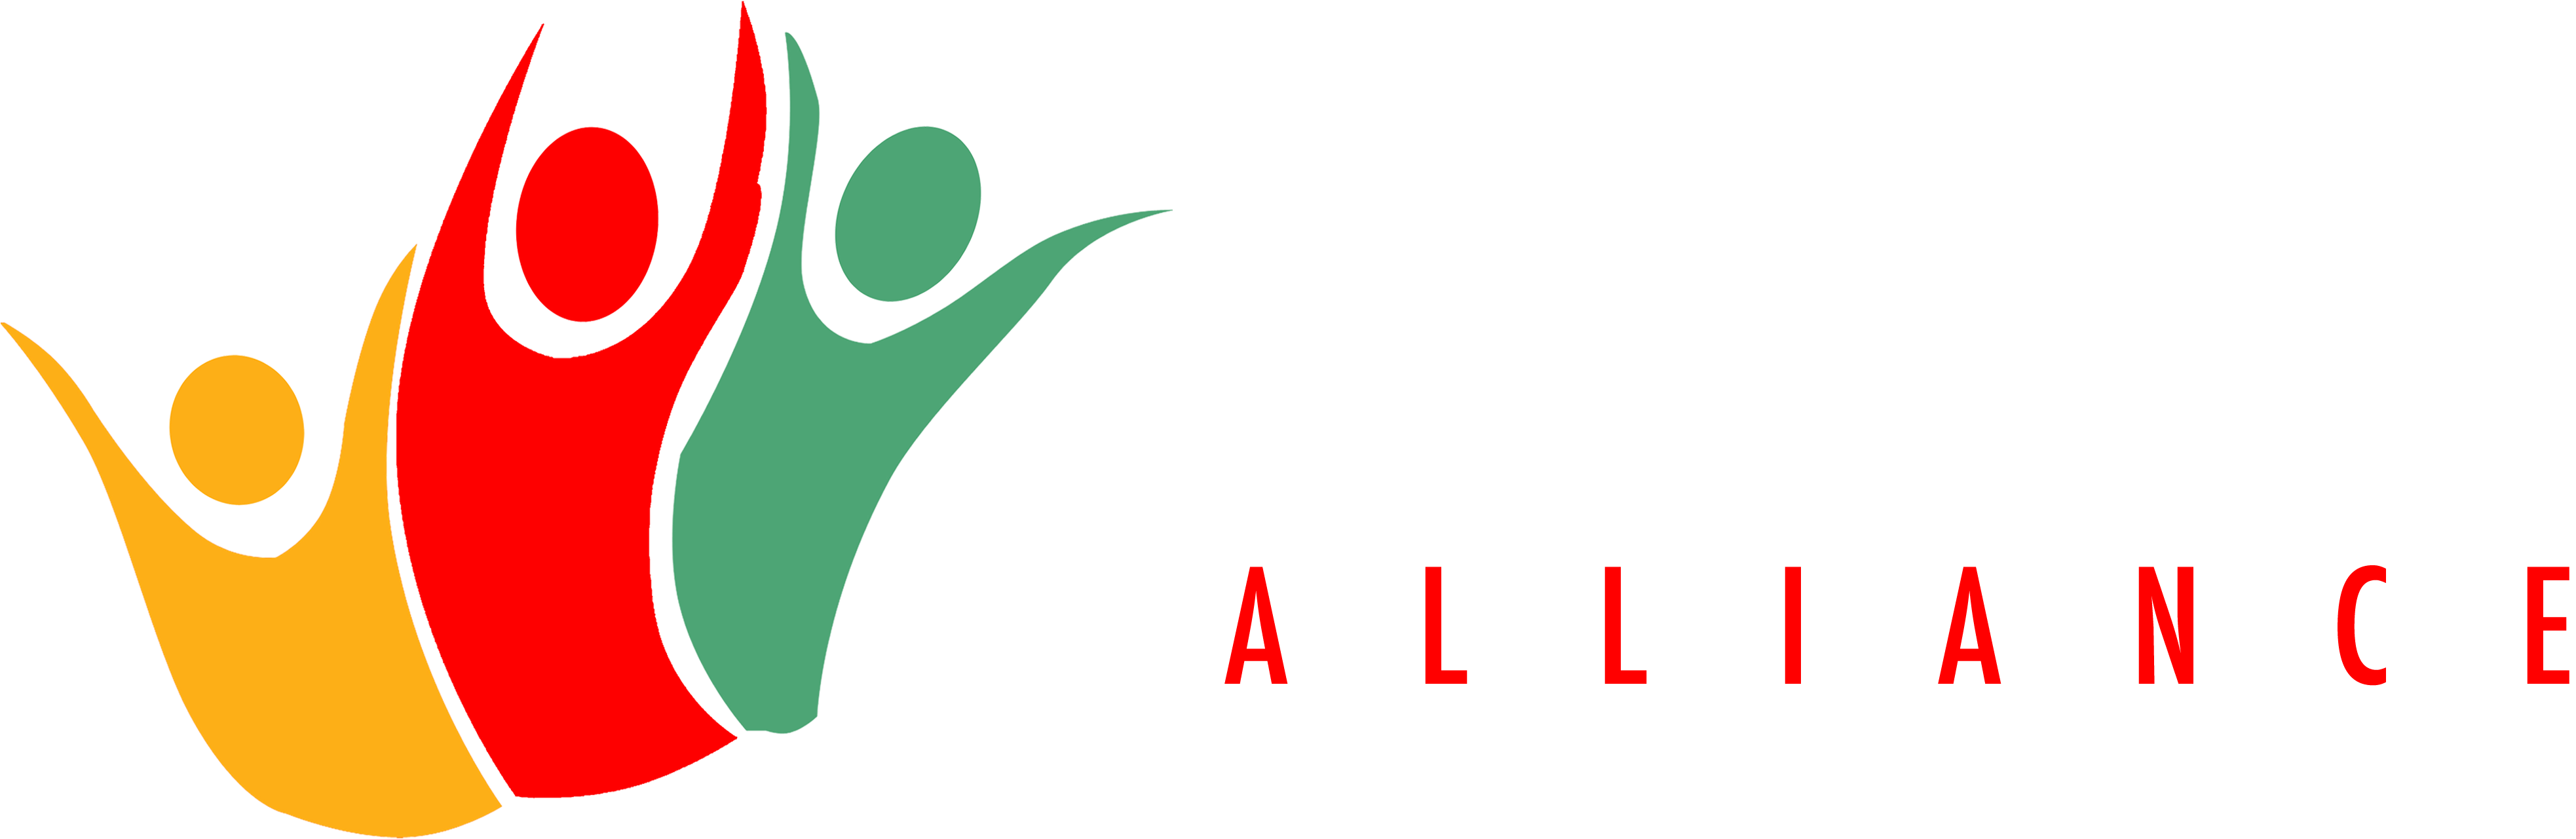 Anti-hillary Rally To Stop Detaining & Deporting Refugees - Human Rights Alliance (4200x1434), Png Download